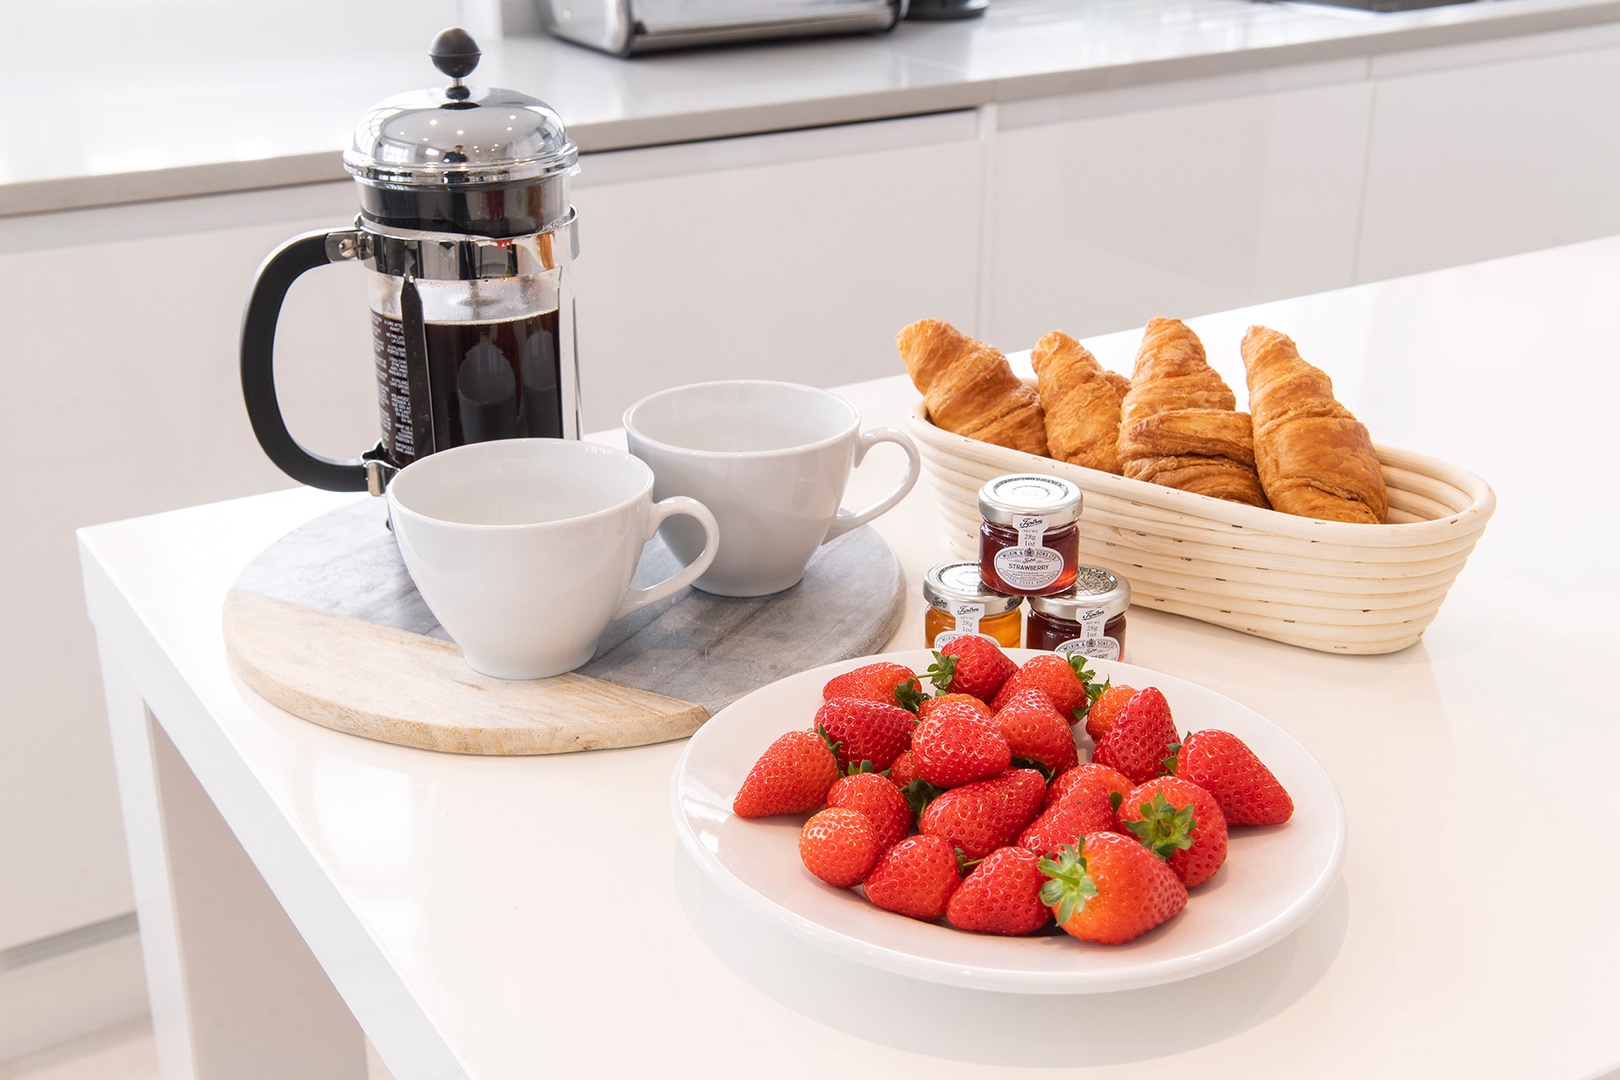 Start your days in London with a relaxed breakfast.